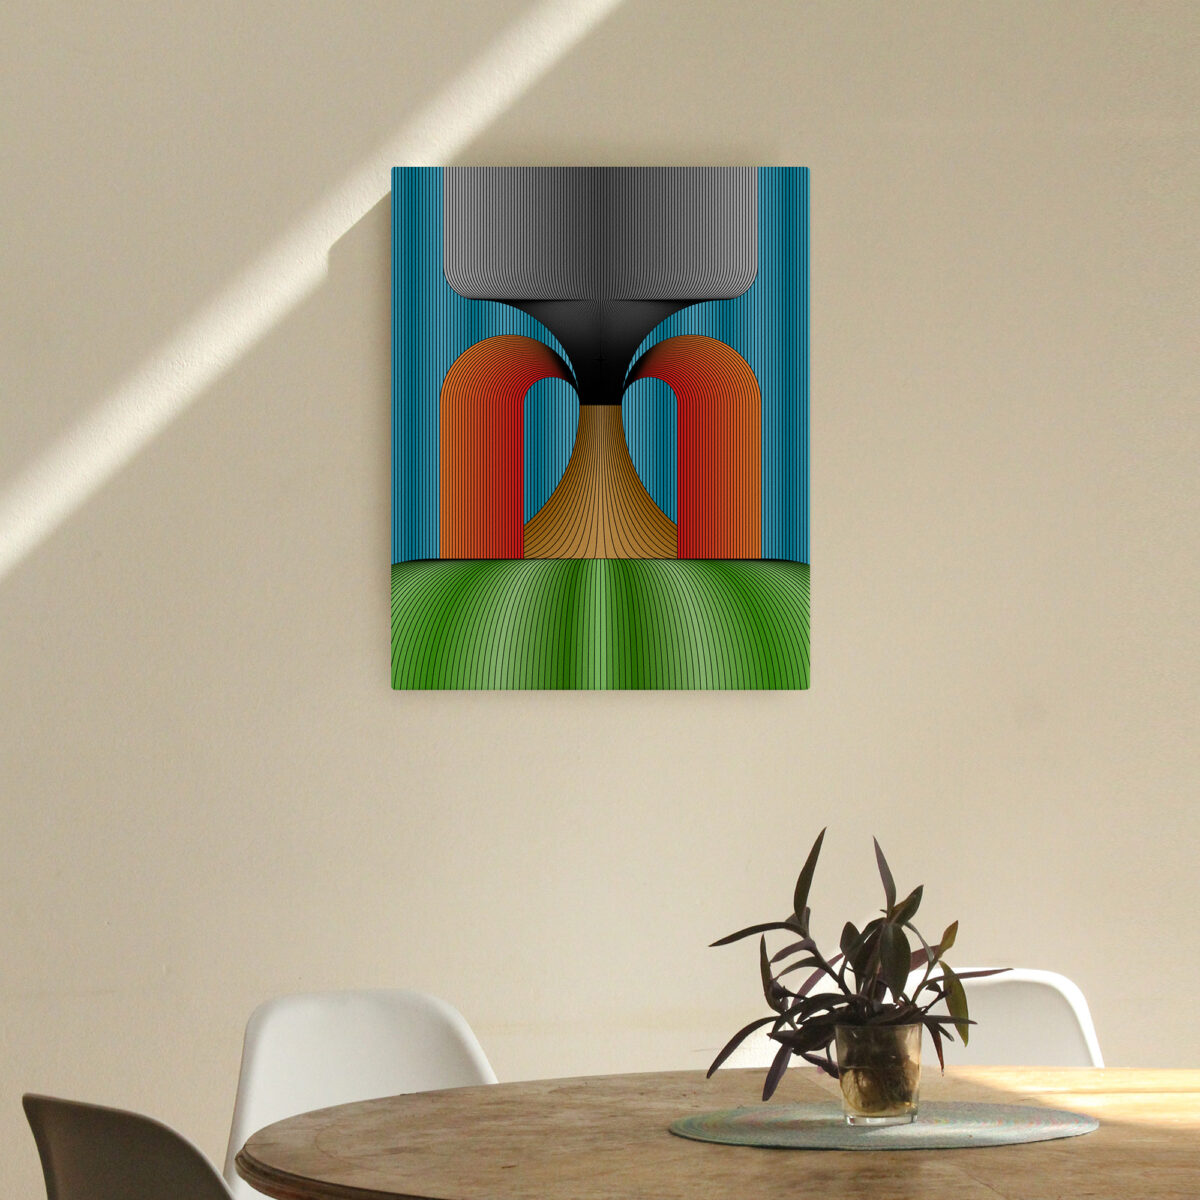 Volcanic canvas print hanging on a wall